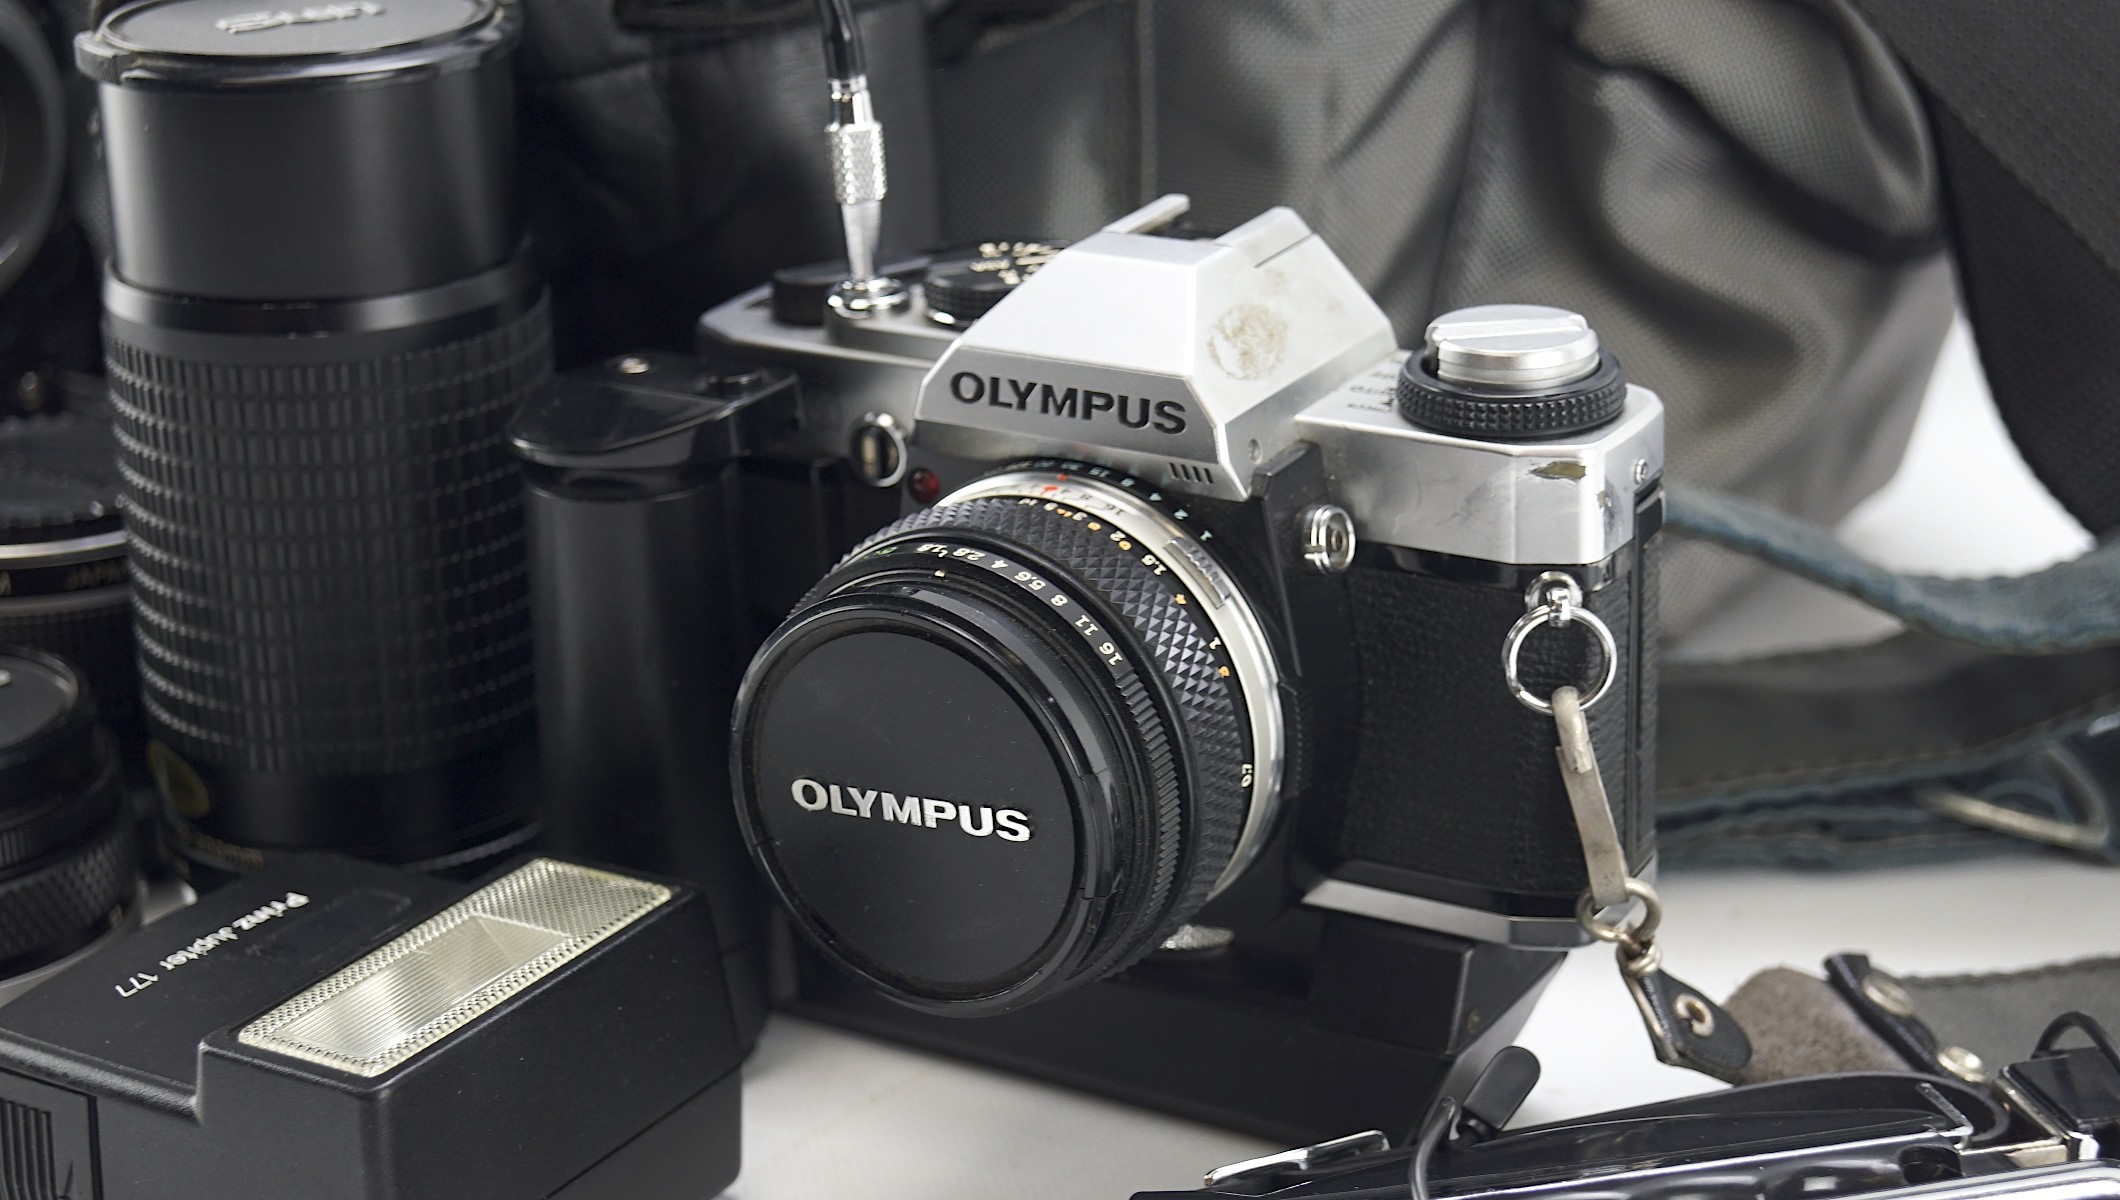 Assortment of cameras and lenses including an Olympus camera and accessories - Image 2 of 4